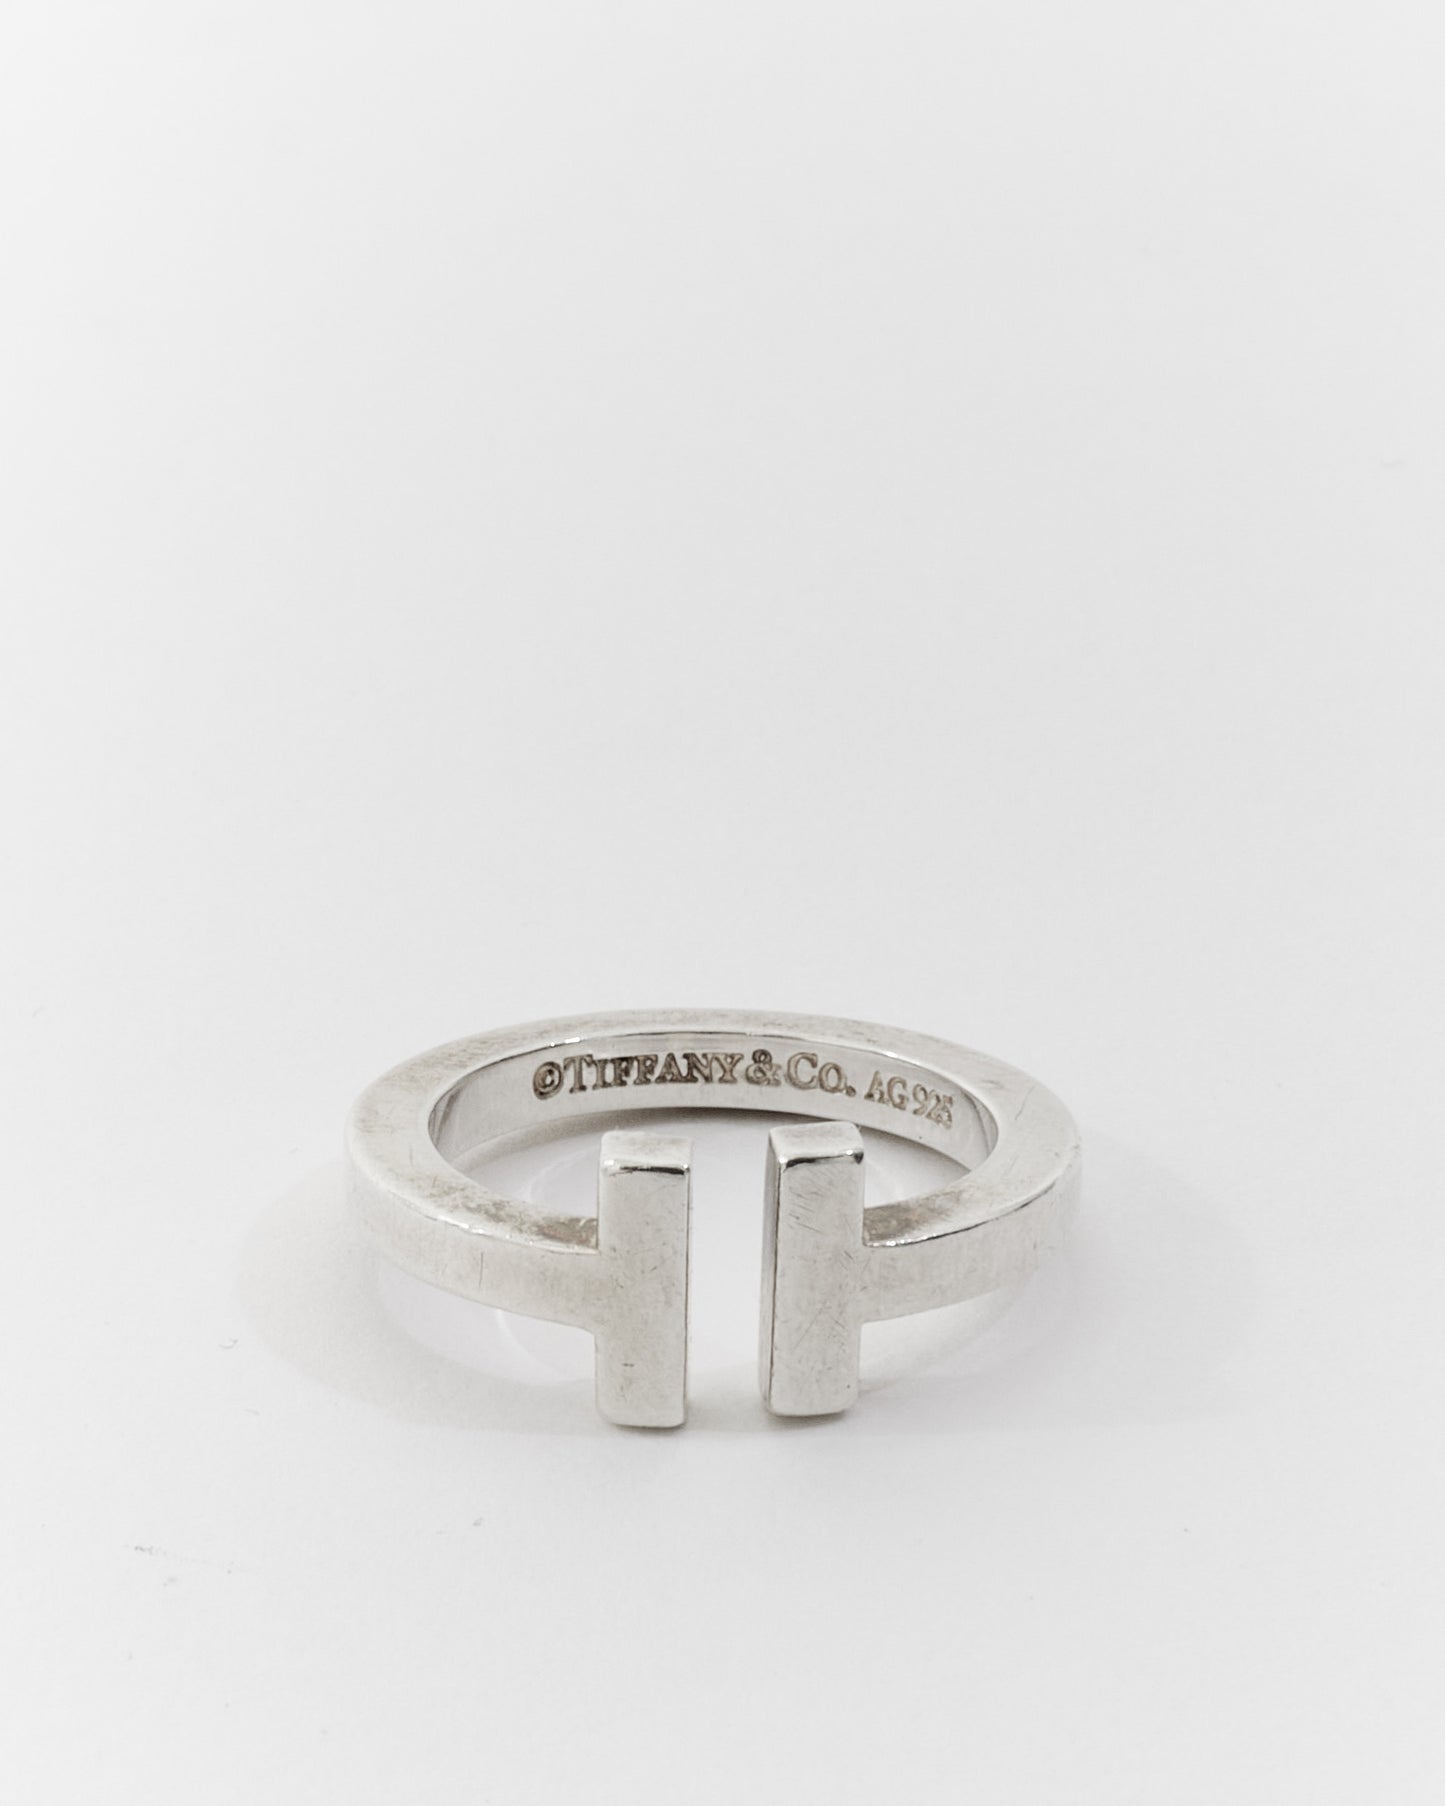 Tiffany & Co. Sterling Silver Tiffany T Square Ring - 5